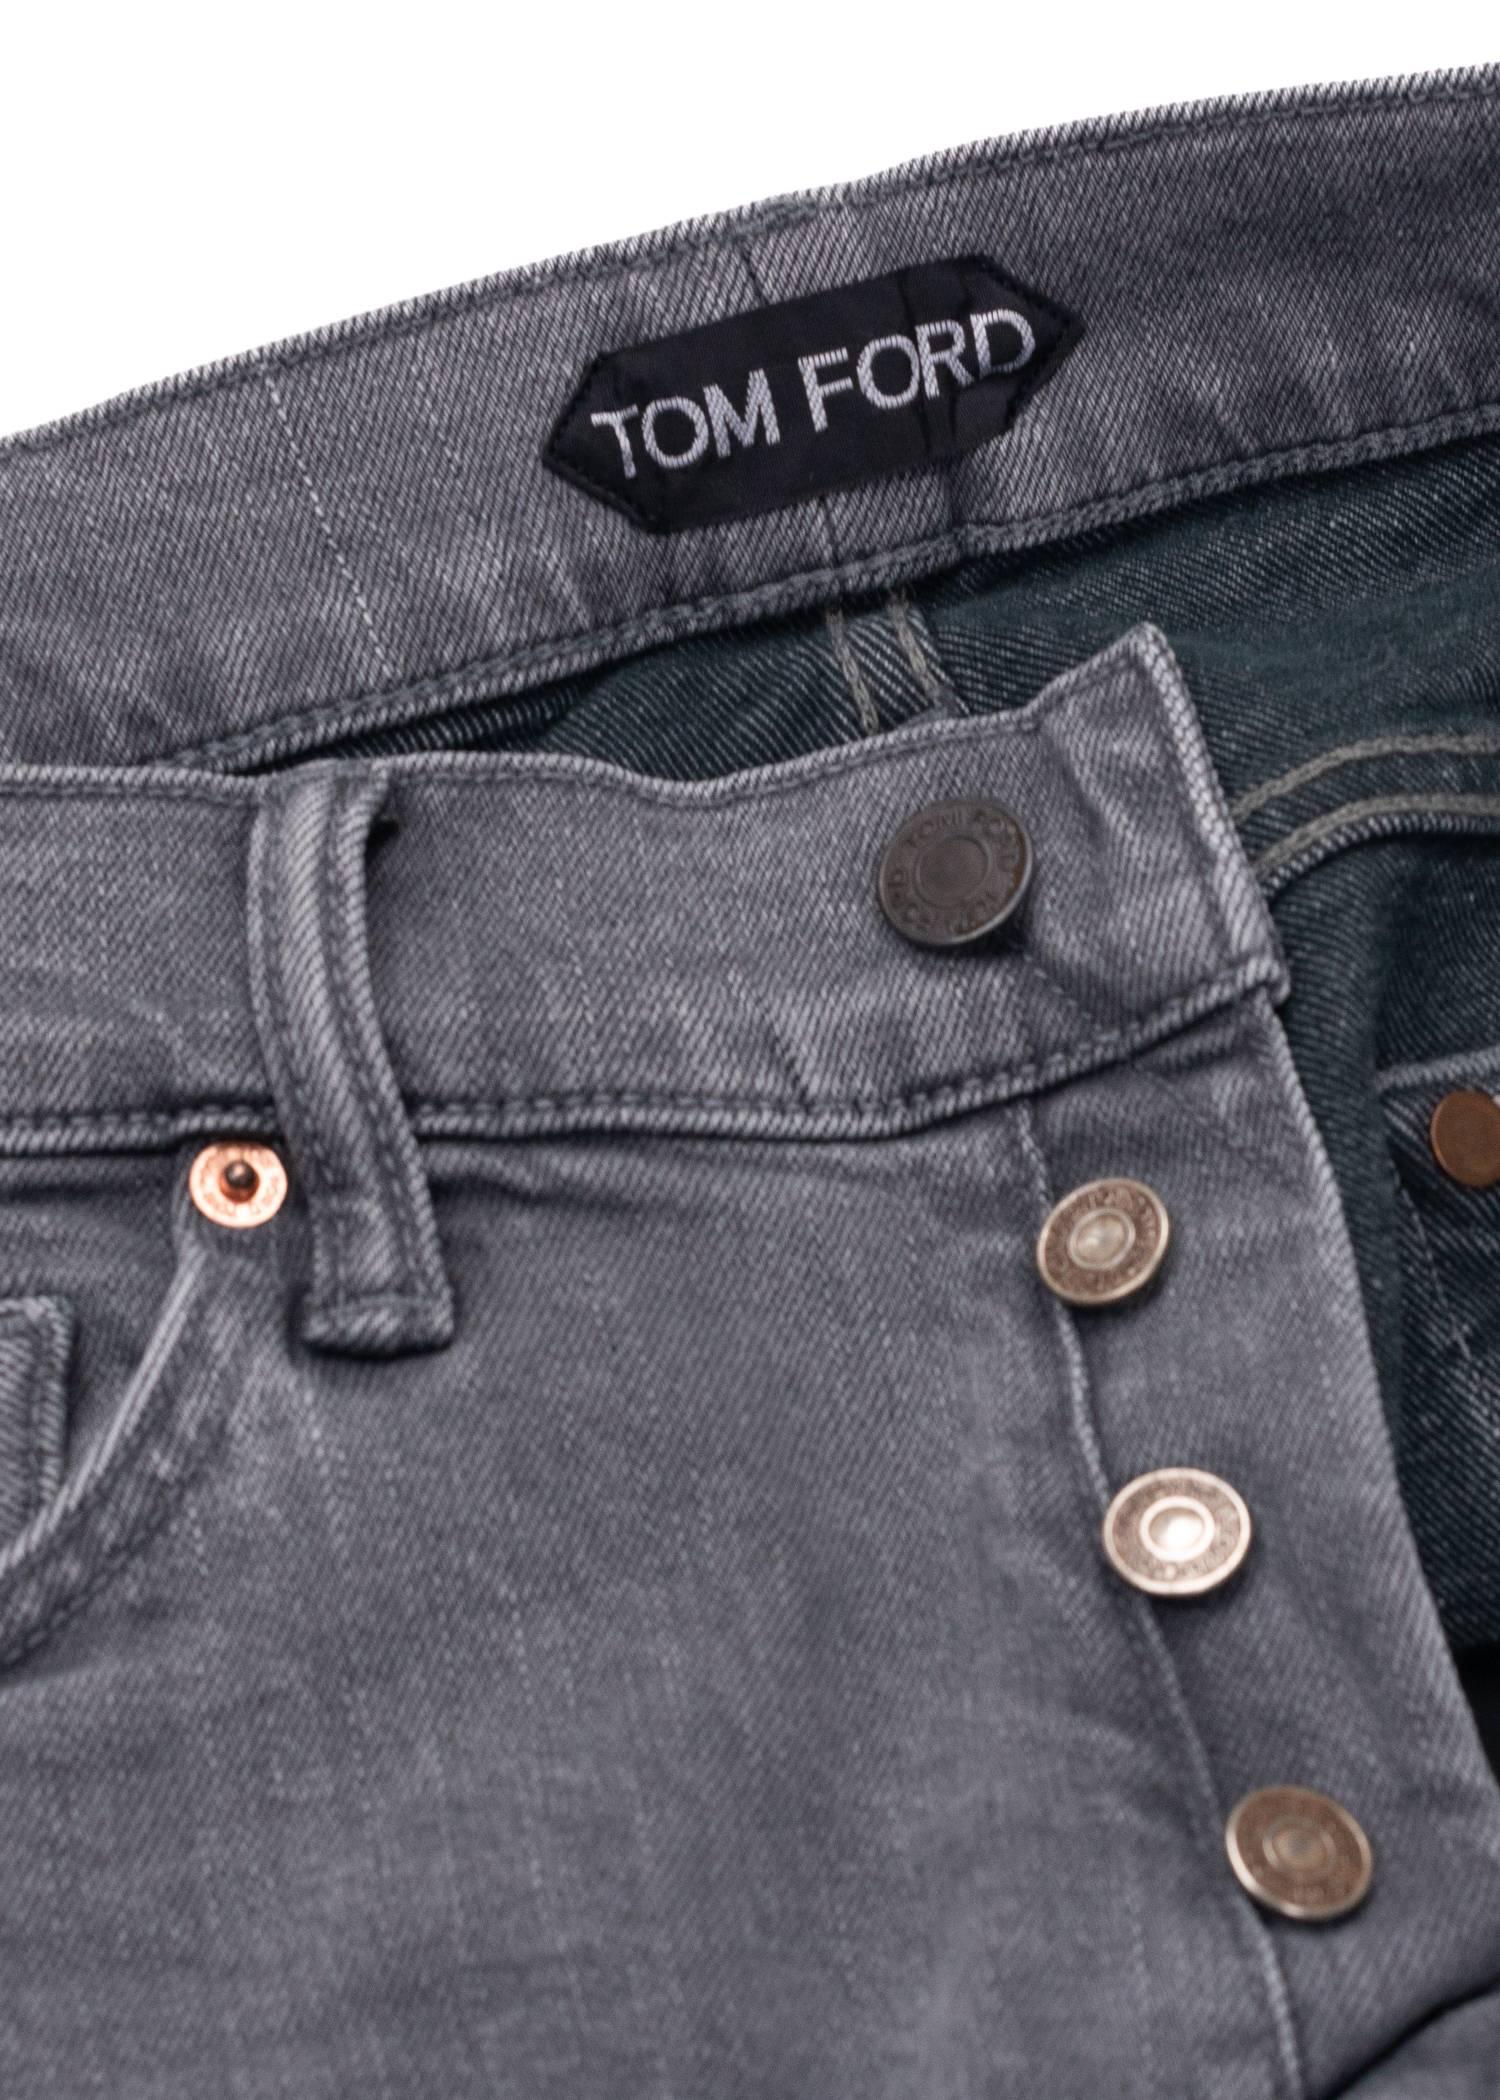 Gray Tom Ford Selvedge Denim Jeans Medium Grey Wash Size 34 Straight Fit Model   For Sale